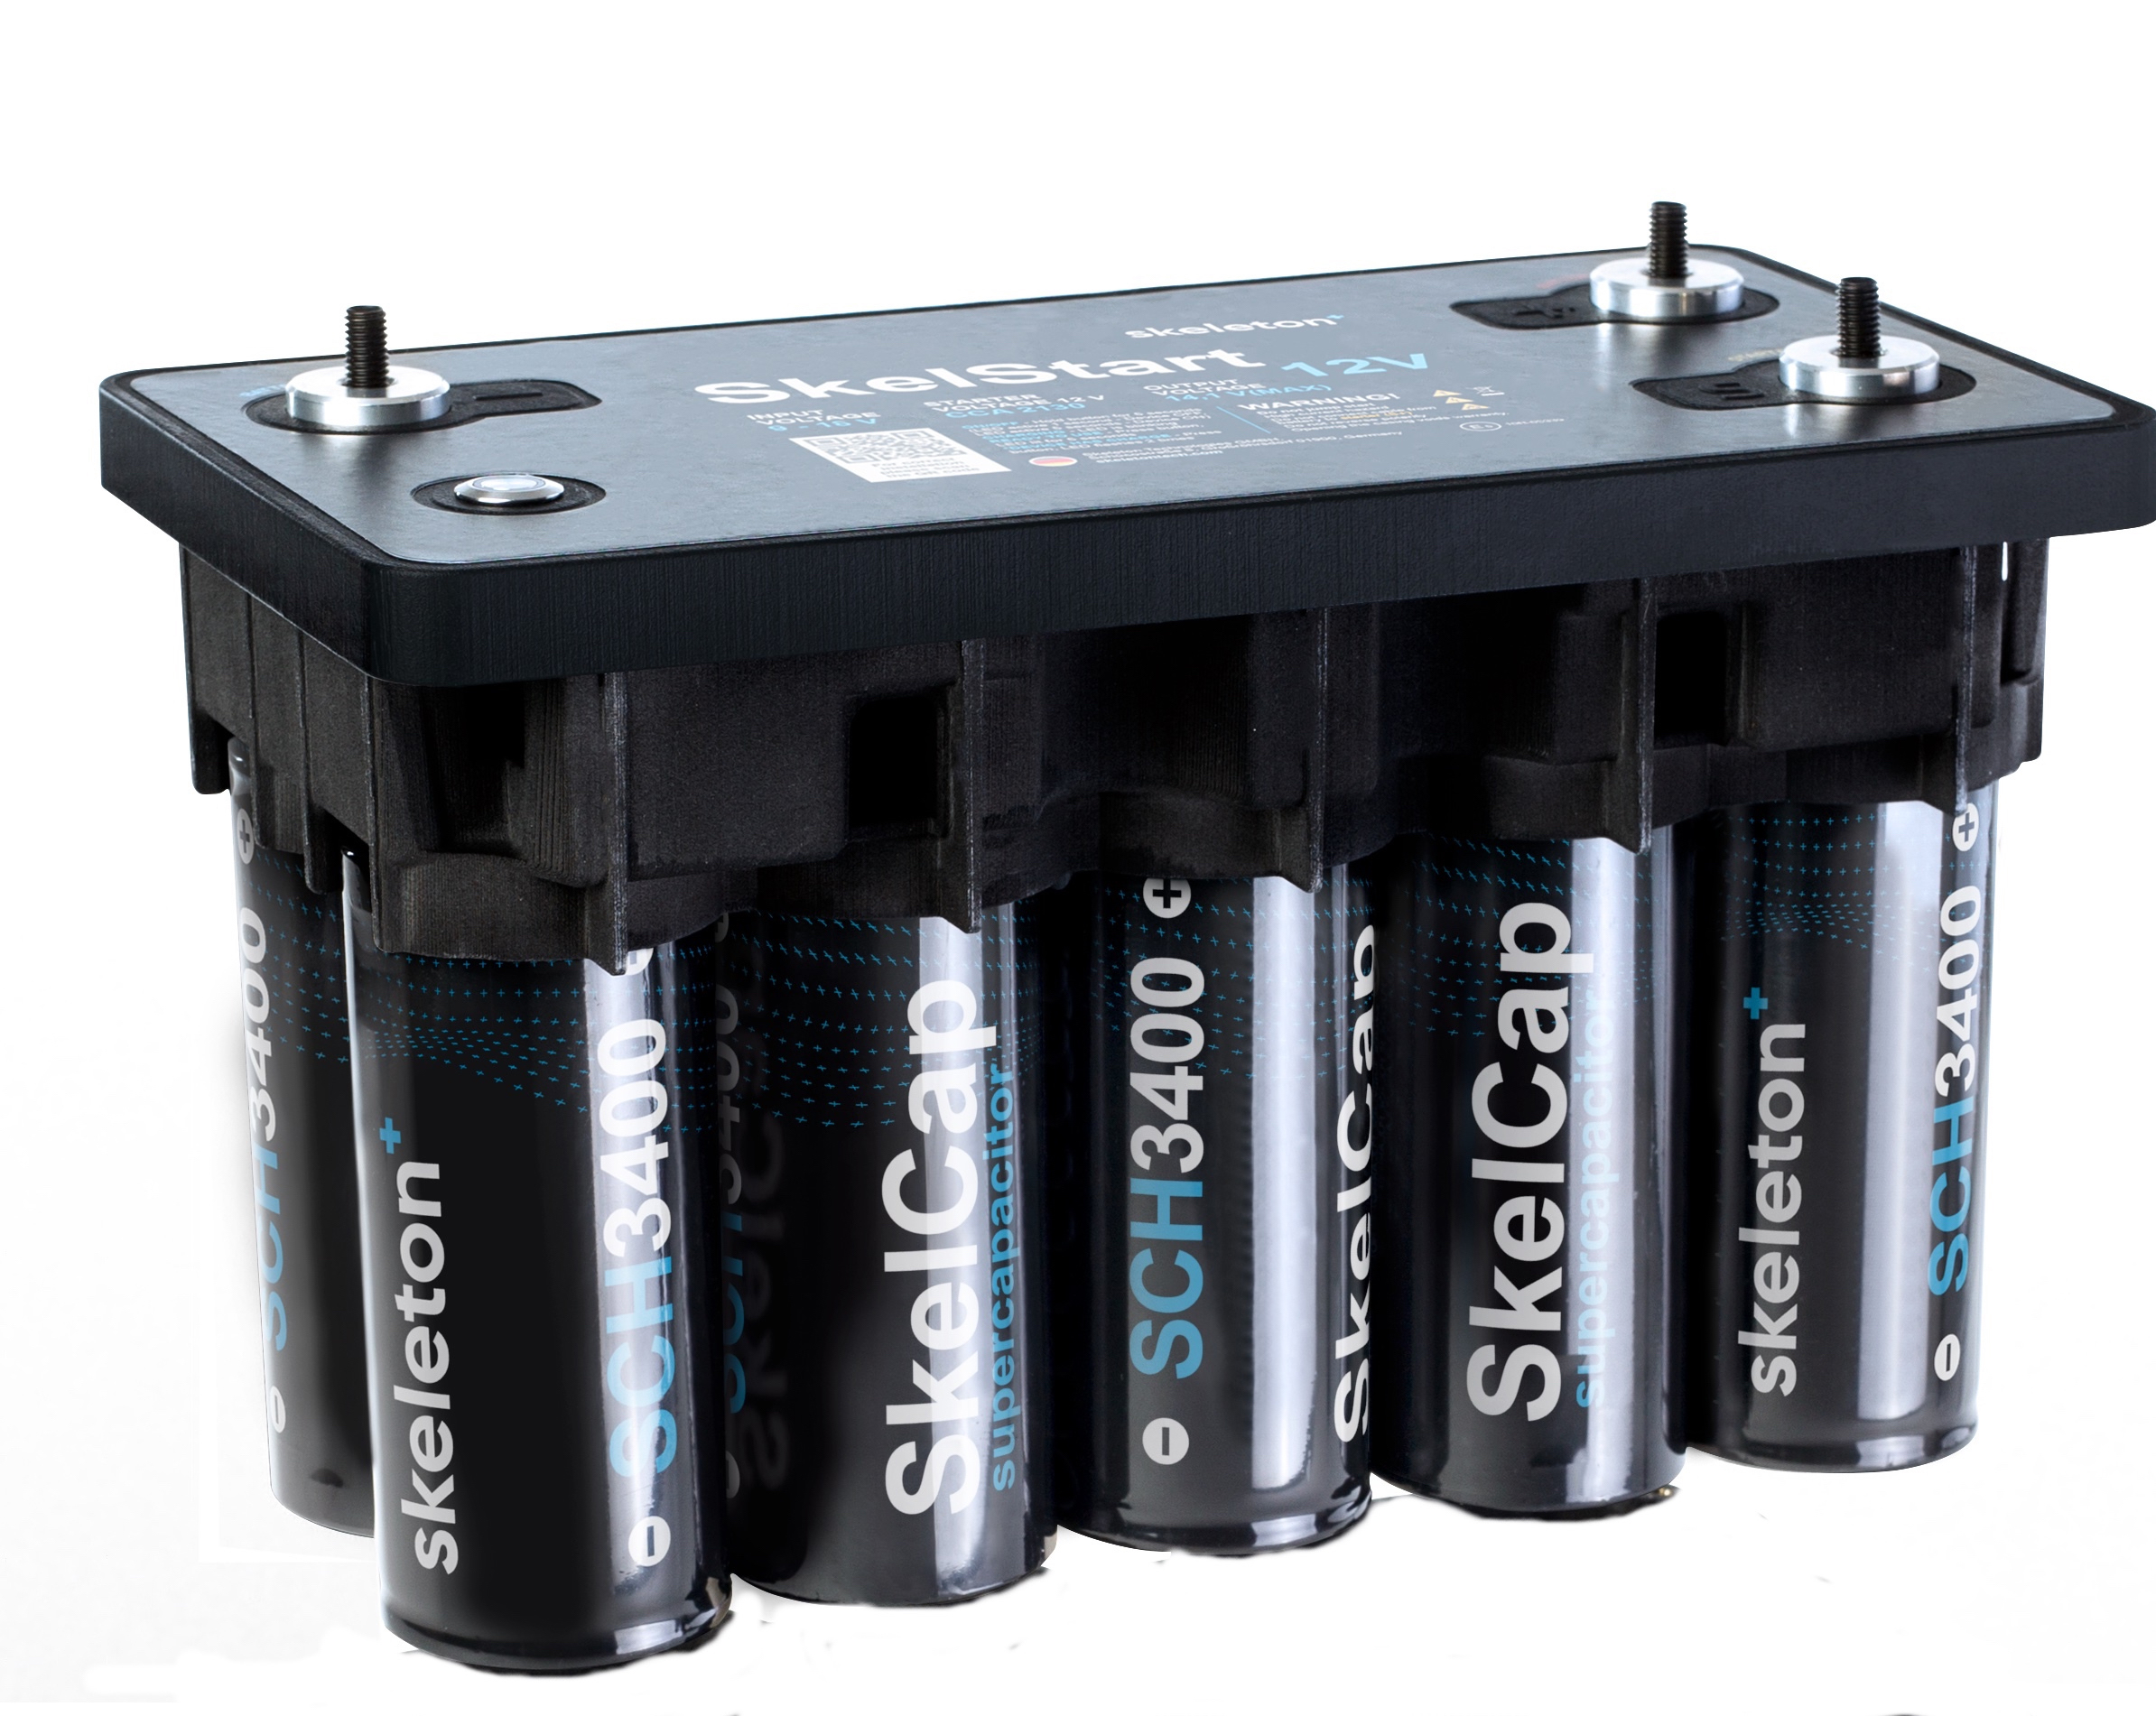 One SkelStart can put out three times the amperage of an average lead-acid battery.